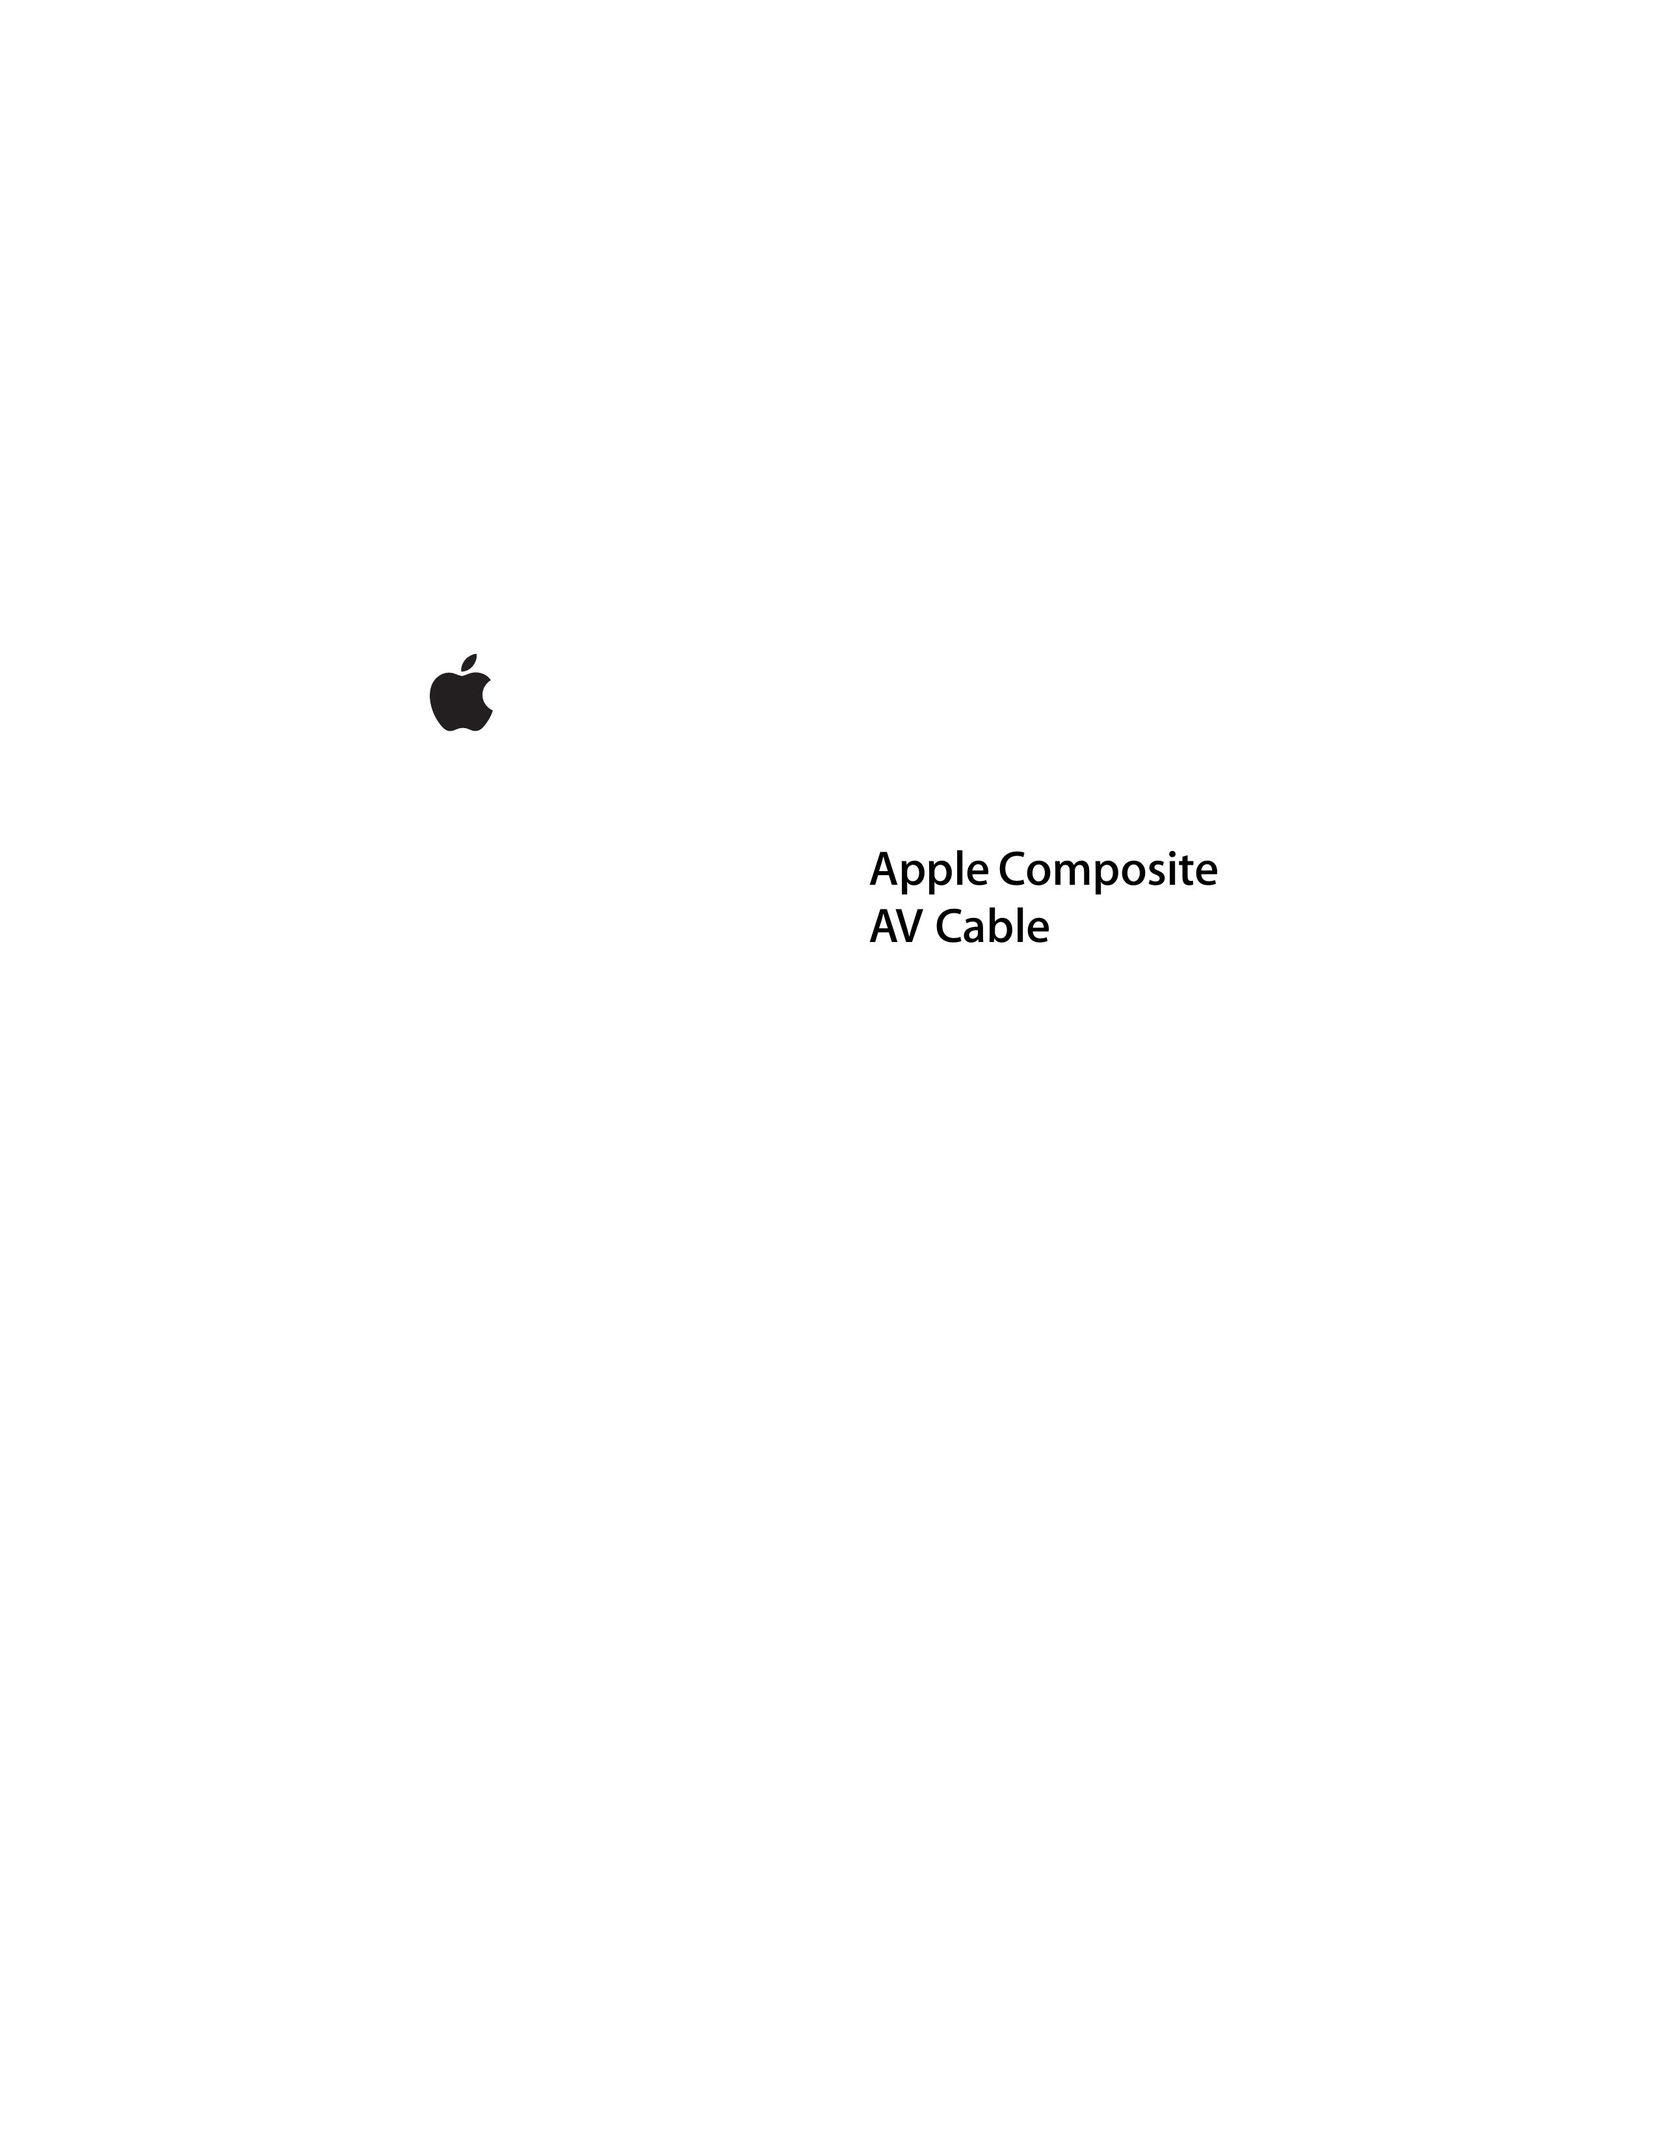 Apple Composite Network Cables User Manual